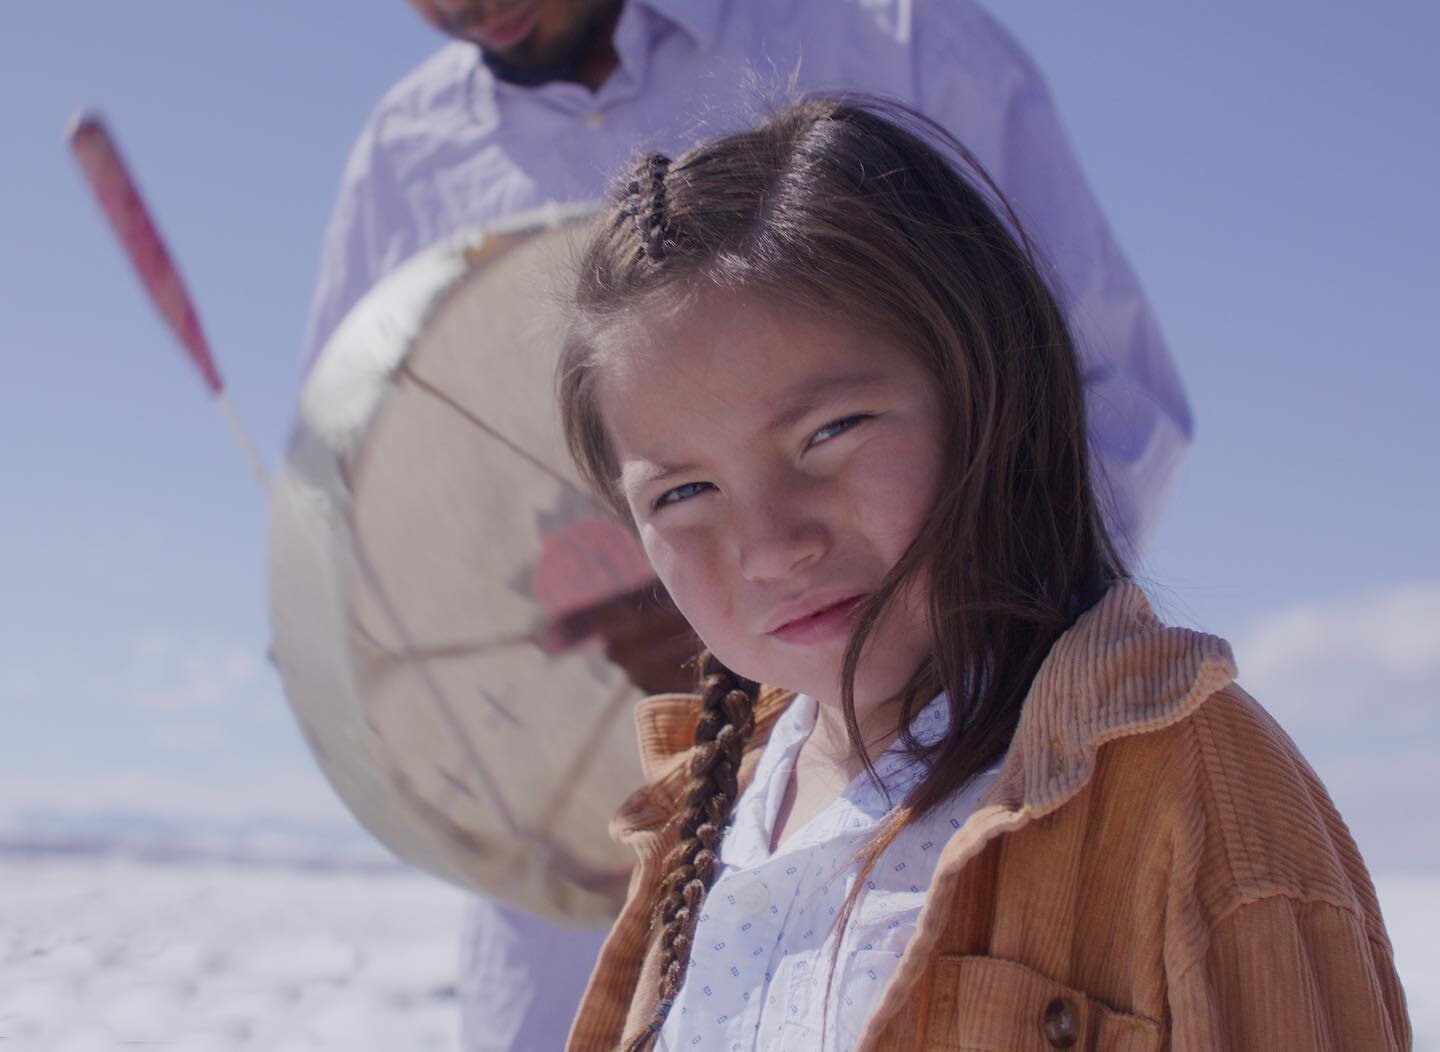 A frame grab of a young Shoshone tribe member during a bison serenade. Taken for on ongoing documentary on the coming of age of youth on the Shoshone/Arapaho reservation.